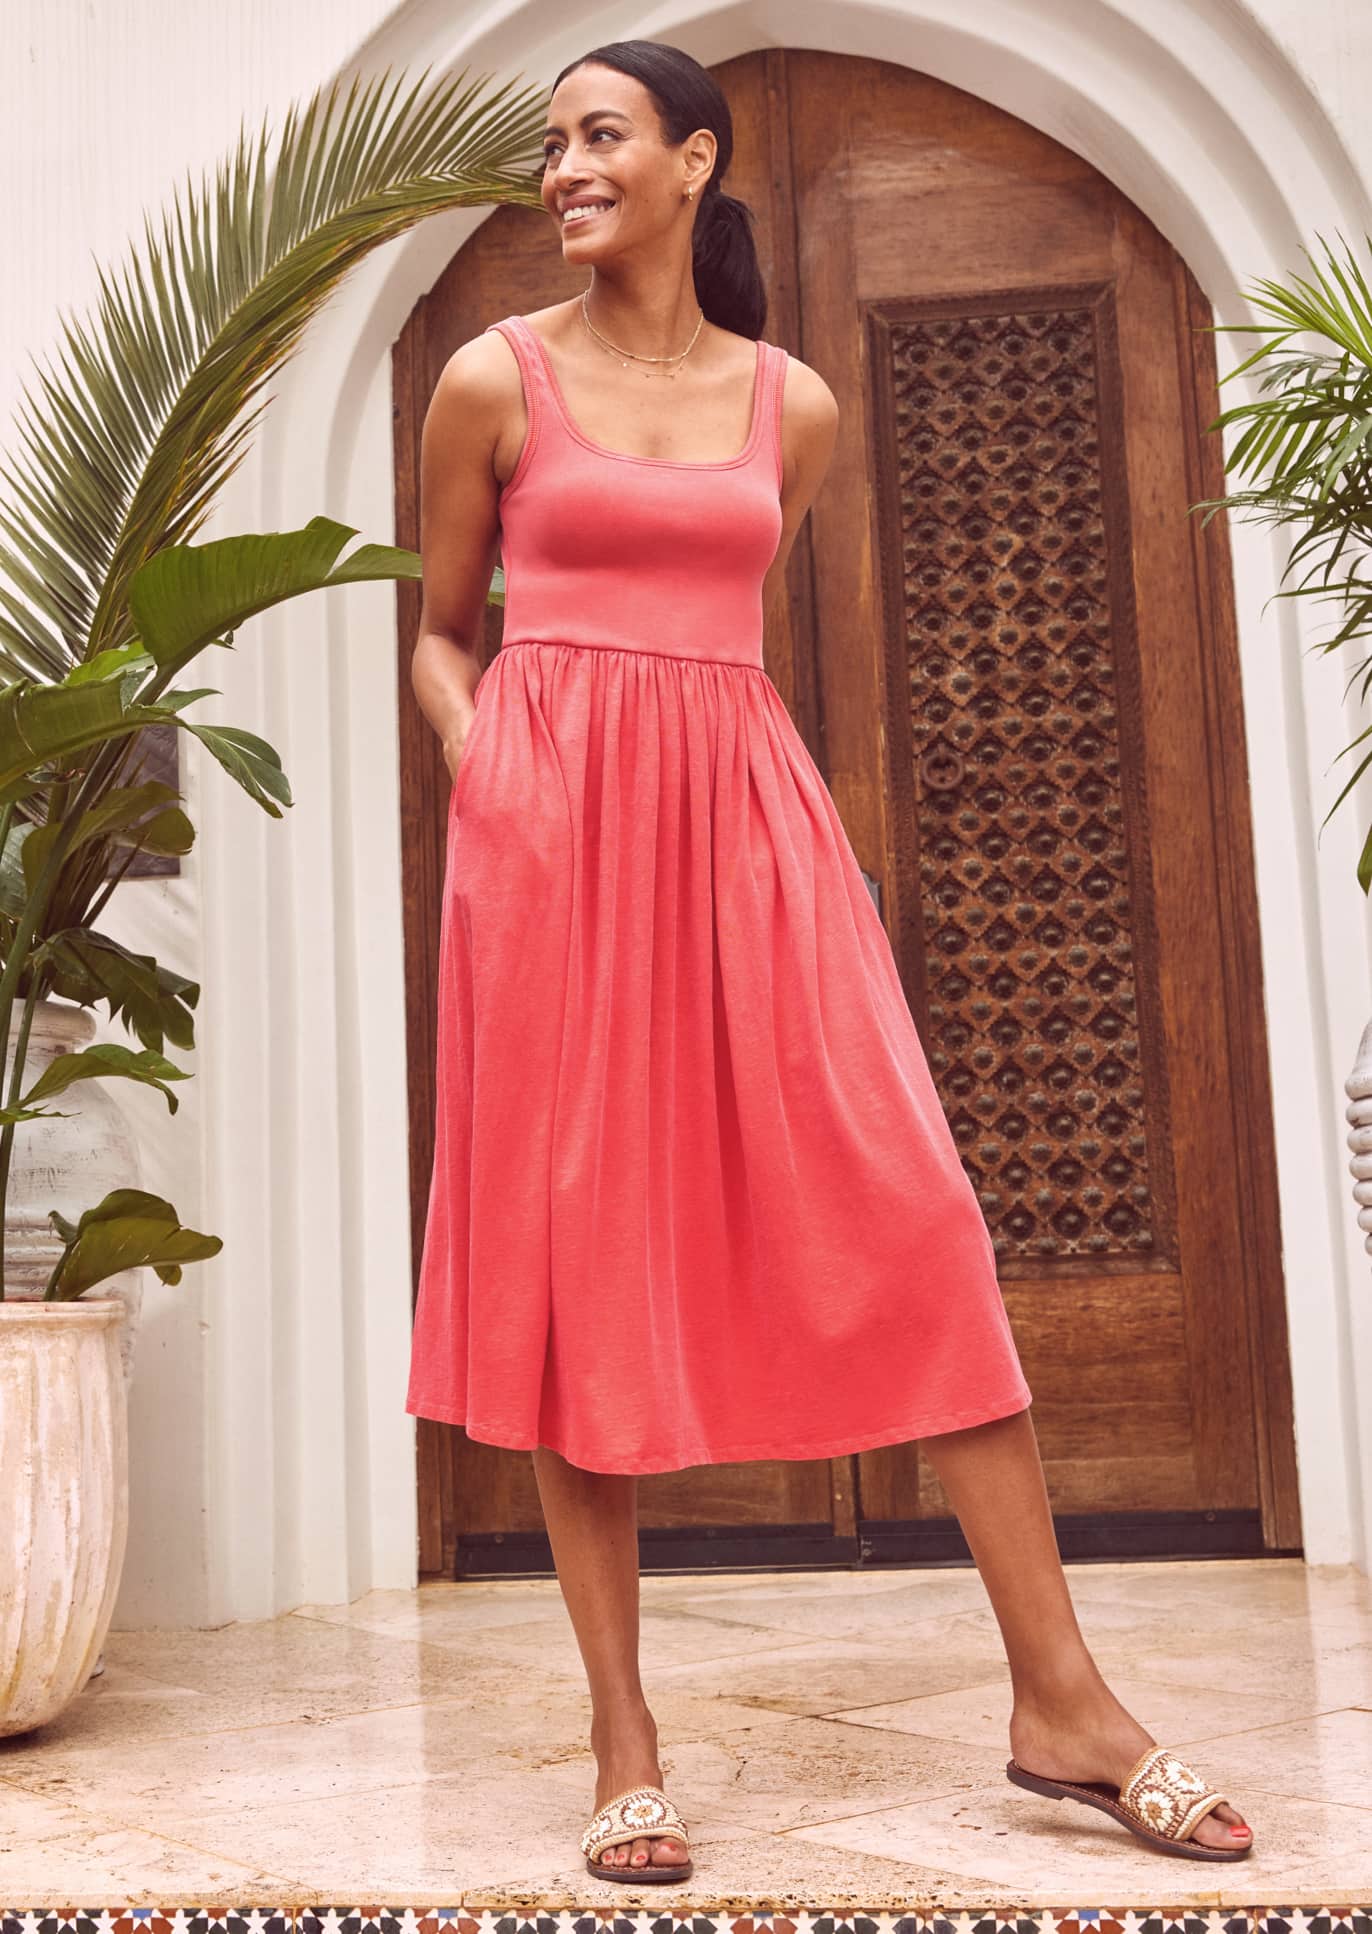 'Sunlight on your shoulders, easy energy, and sophisticated, bold colors—all in these perfect summer dresses.'